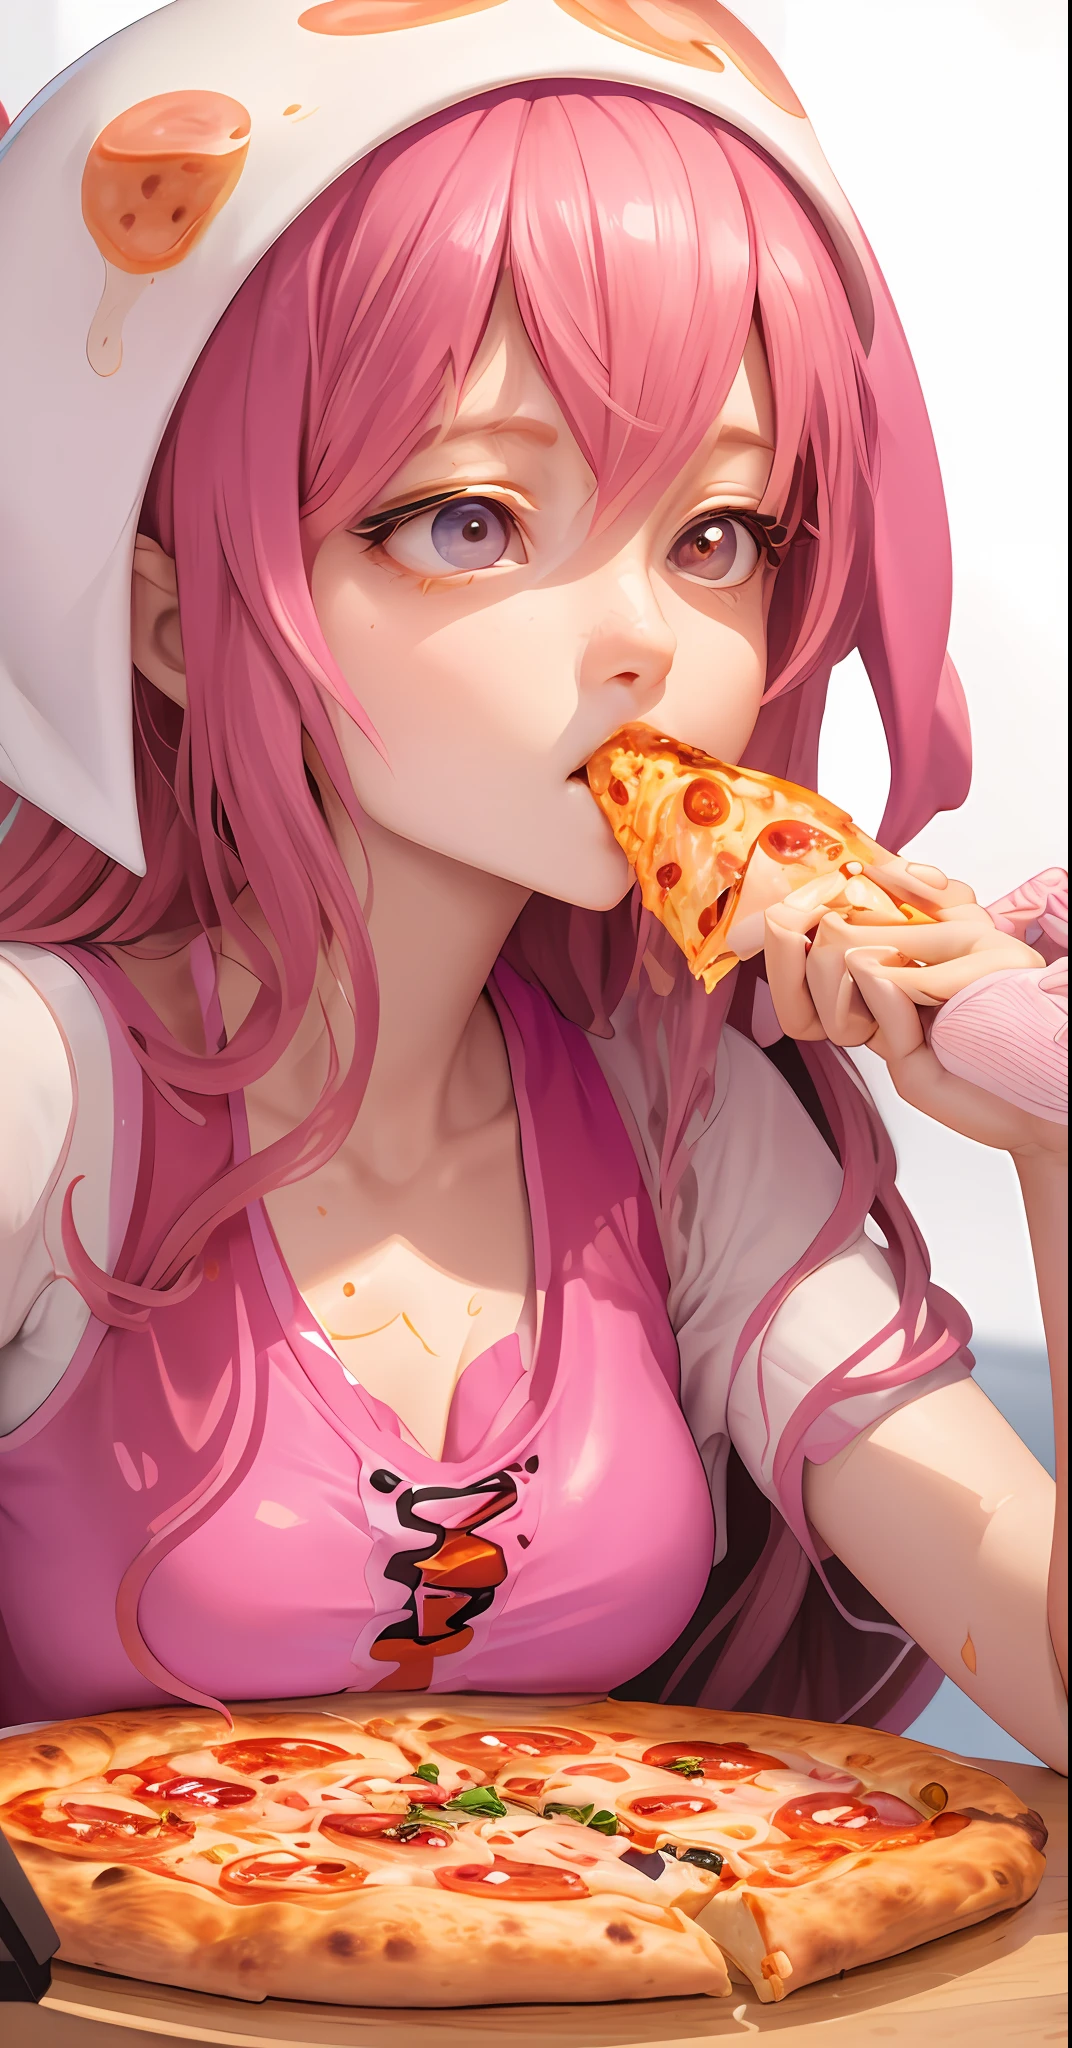 there is a woman sitting at a table with a Pizza and octopus tentacles, munching Pizza, eating Pizza, Tentakeln um Burger gewickelt, Pizza!, Tentakeln um, presenting Pizza, humanoides rosa weibliches Tintenfischmädchen, eating a Pizza, Anime-Essen, detaillierte digitale Anime-Kunst, Pizza, erstaunliche Essensillustration, sharing a Pizza, einige Tentakeln berühren sie